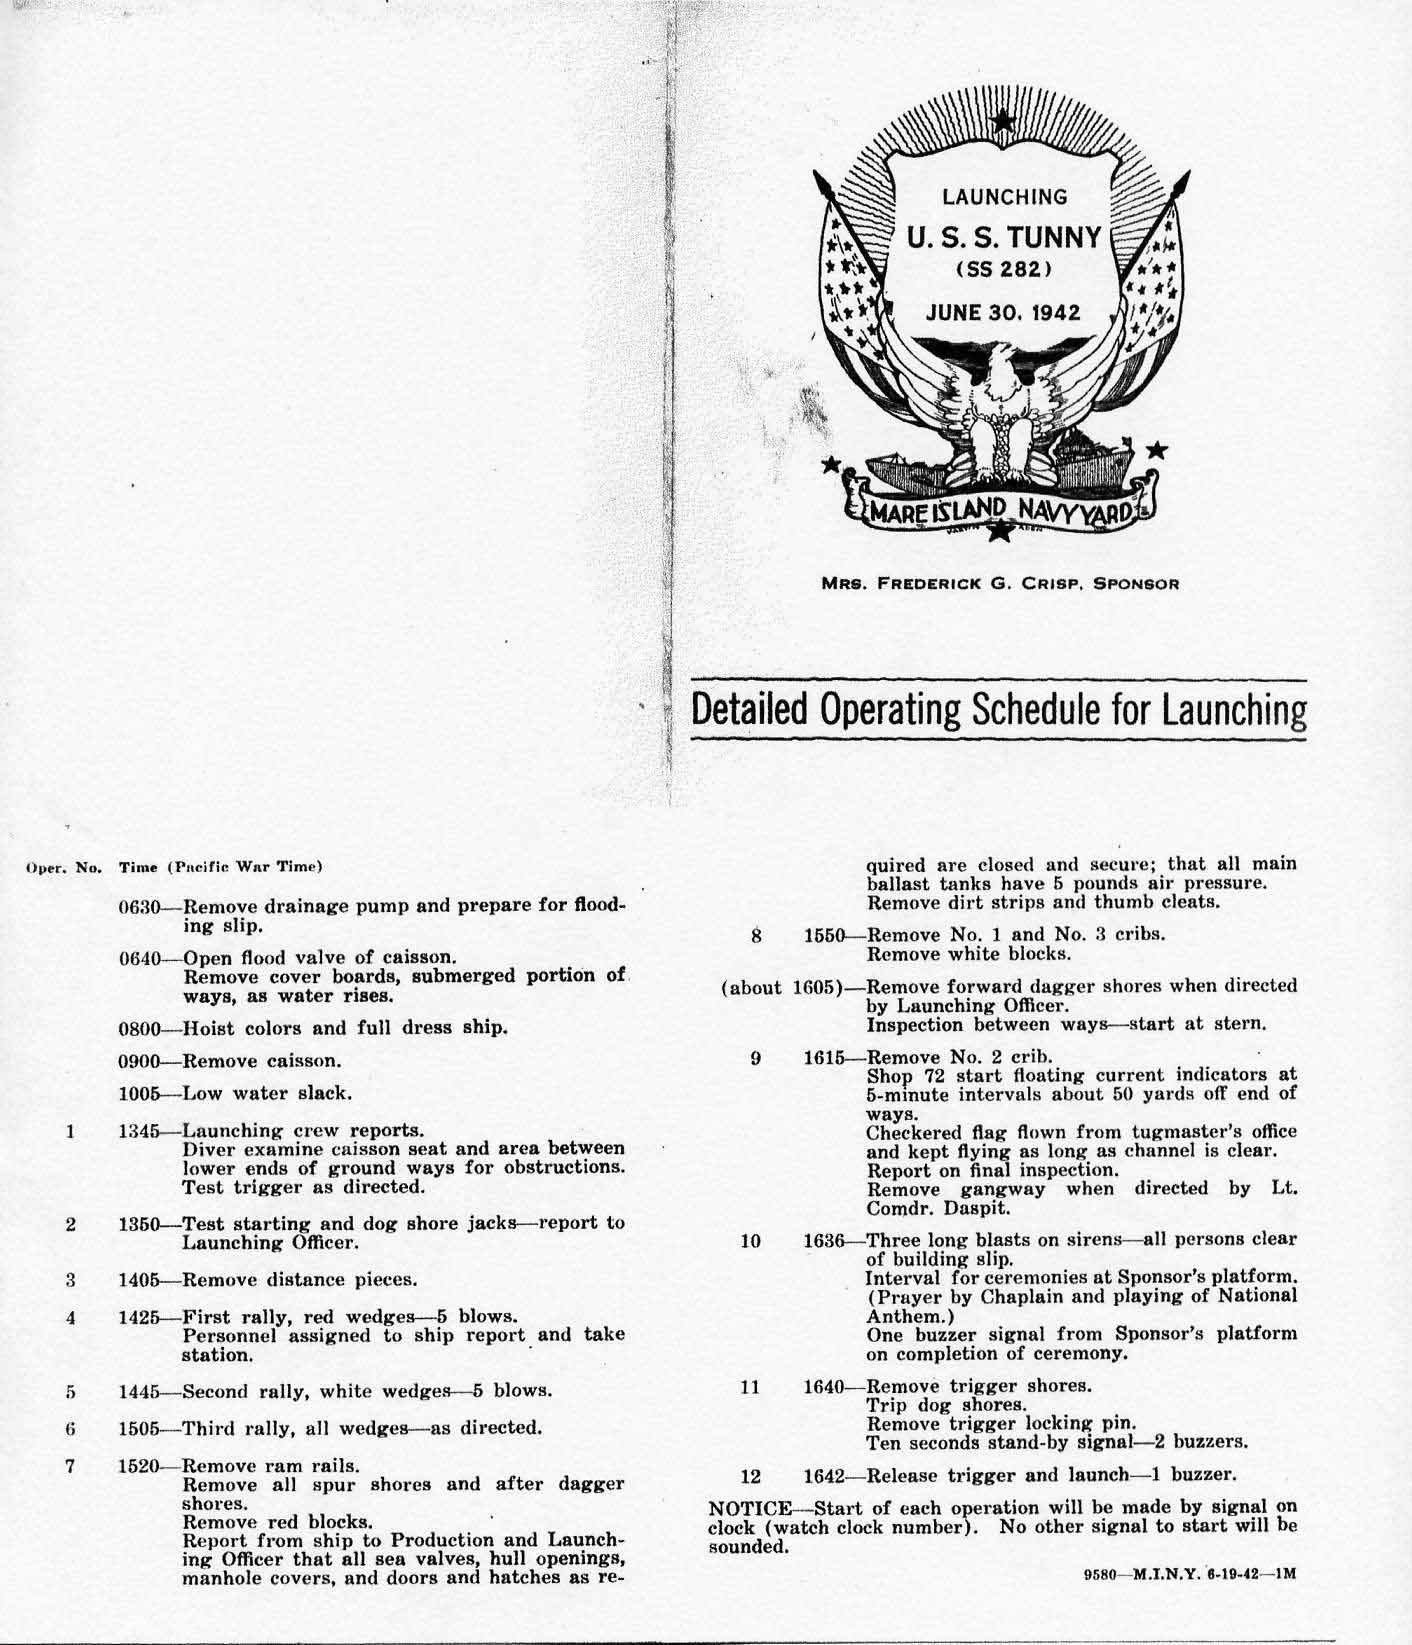 Detailed Operating Schedule for Launching of the Tunny, 30 Jun 1942, page 1 of 2